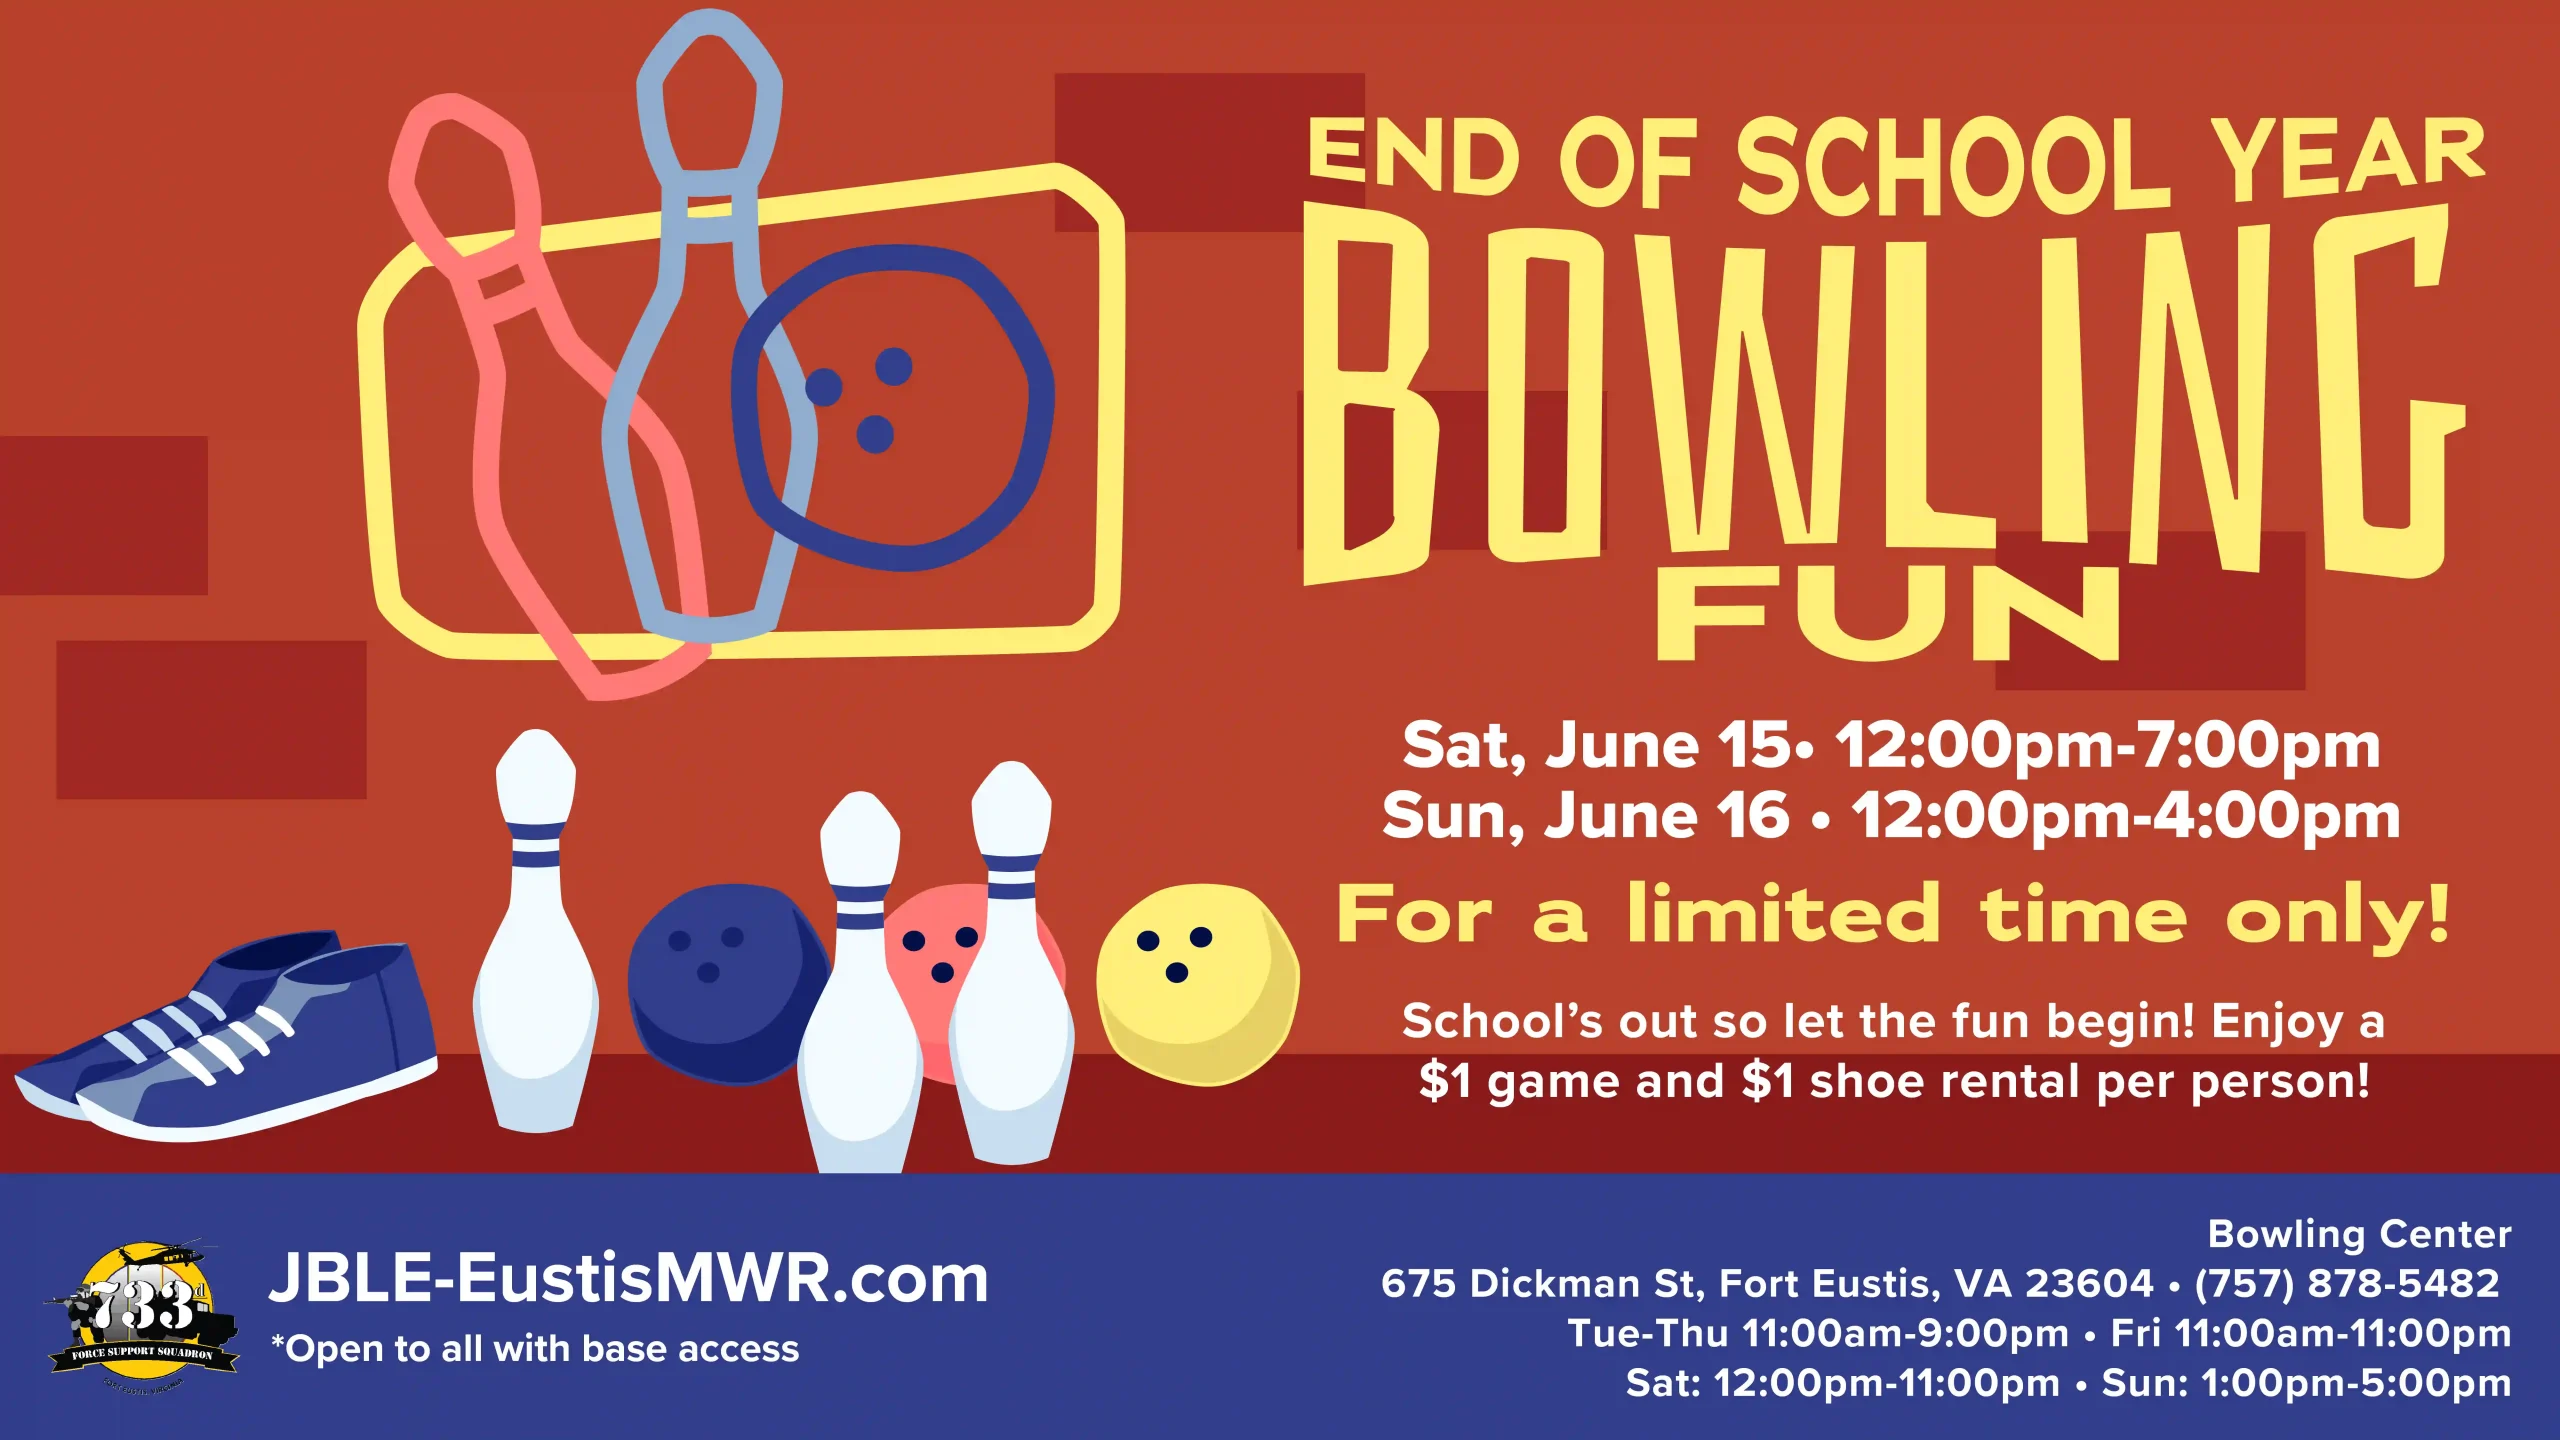 End of School Bowling